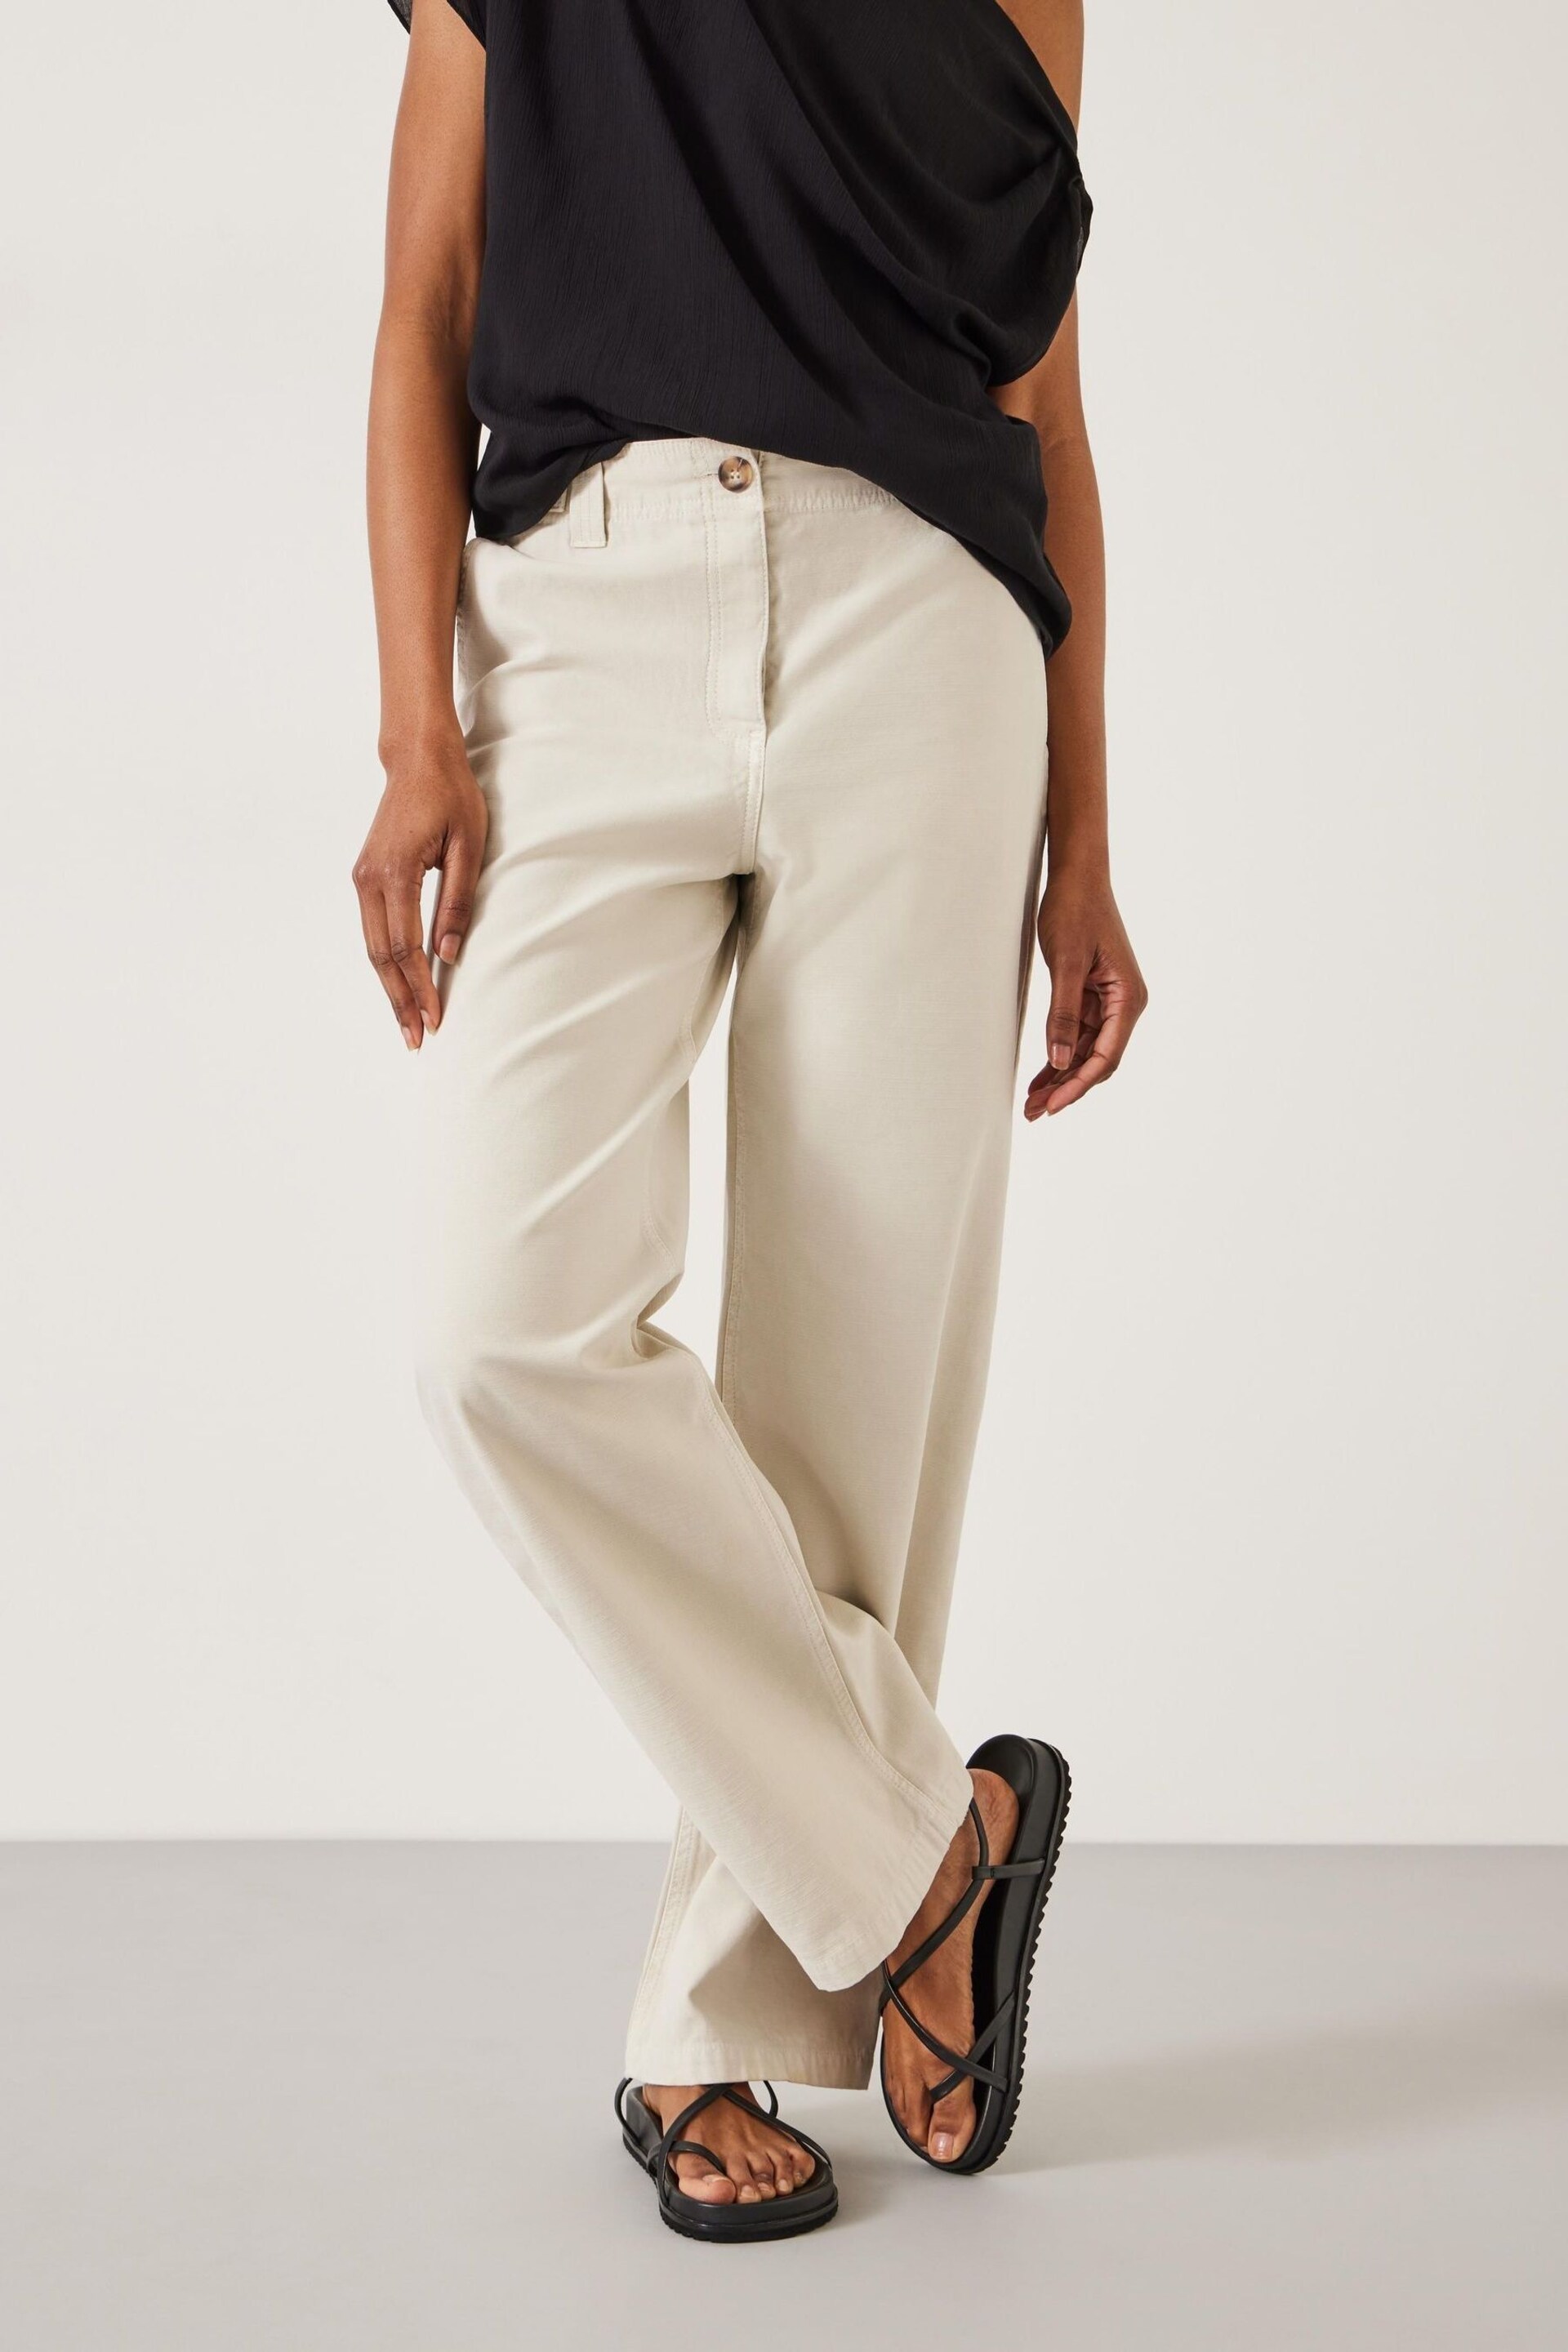 Hush Natural Kia Washed Baker Trousers - Image 4 of 5